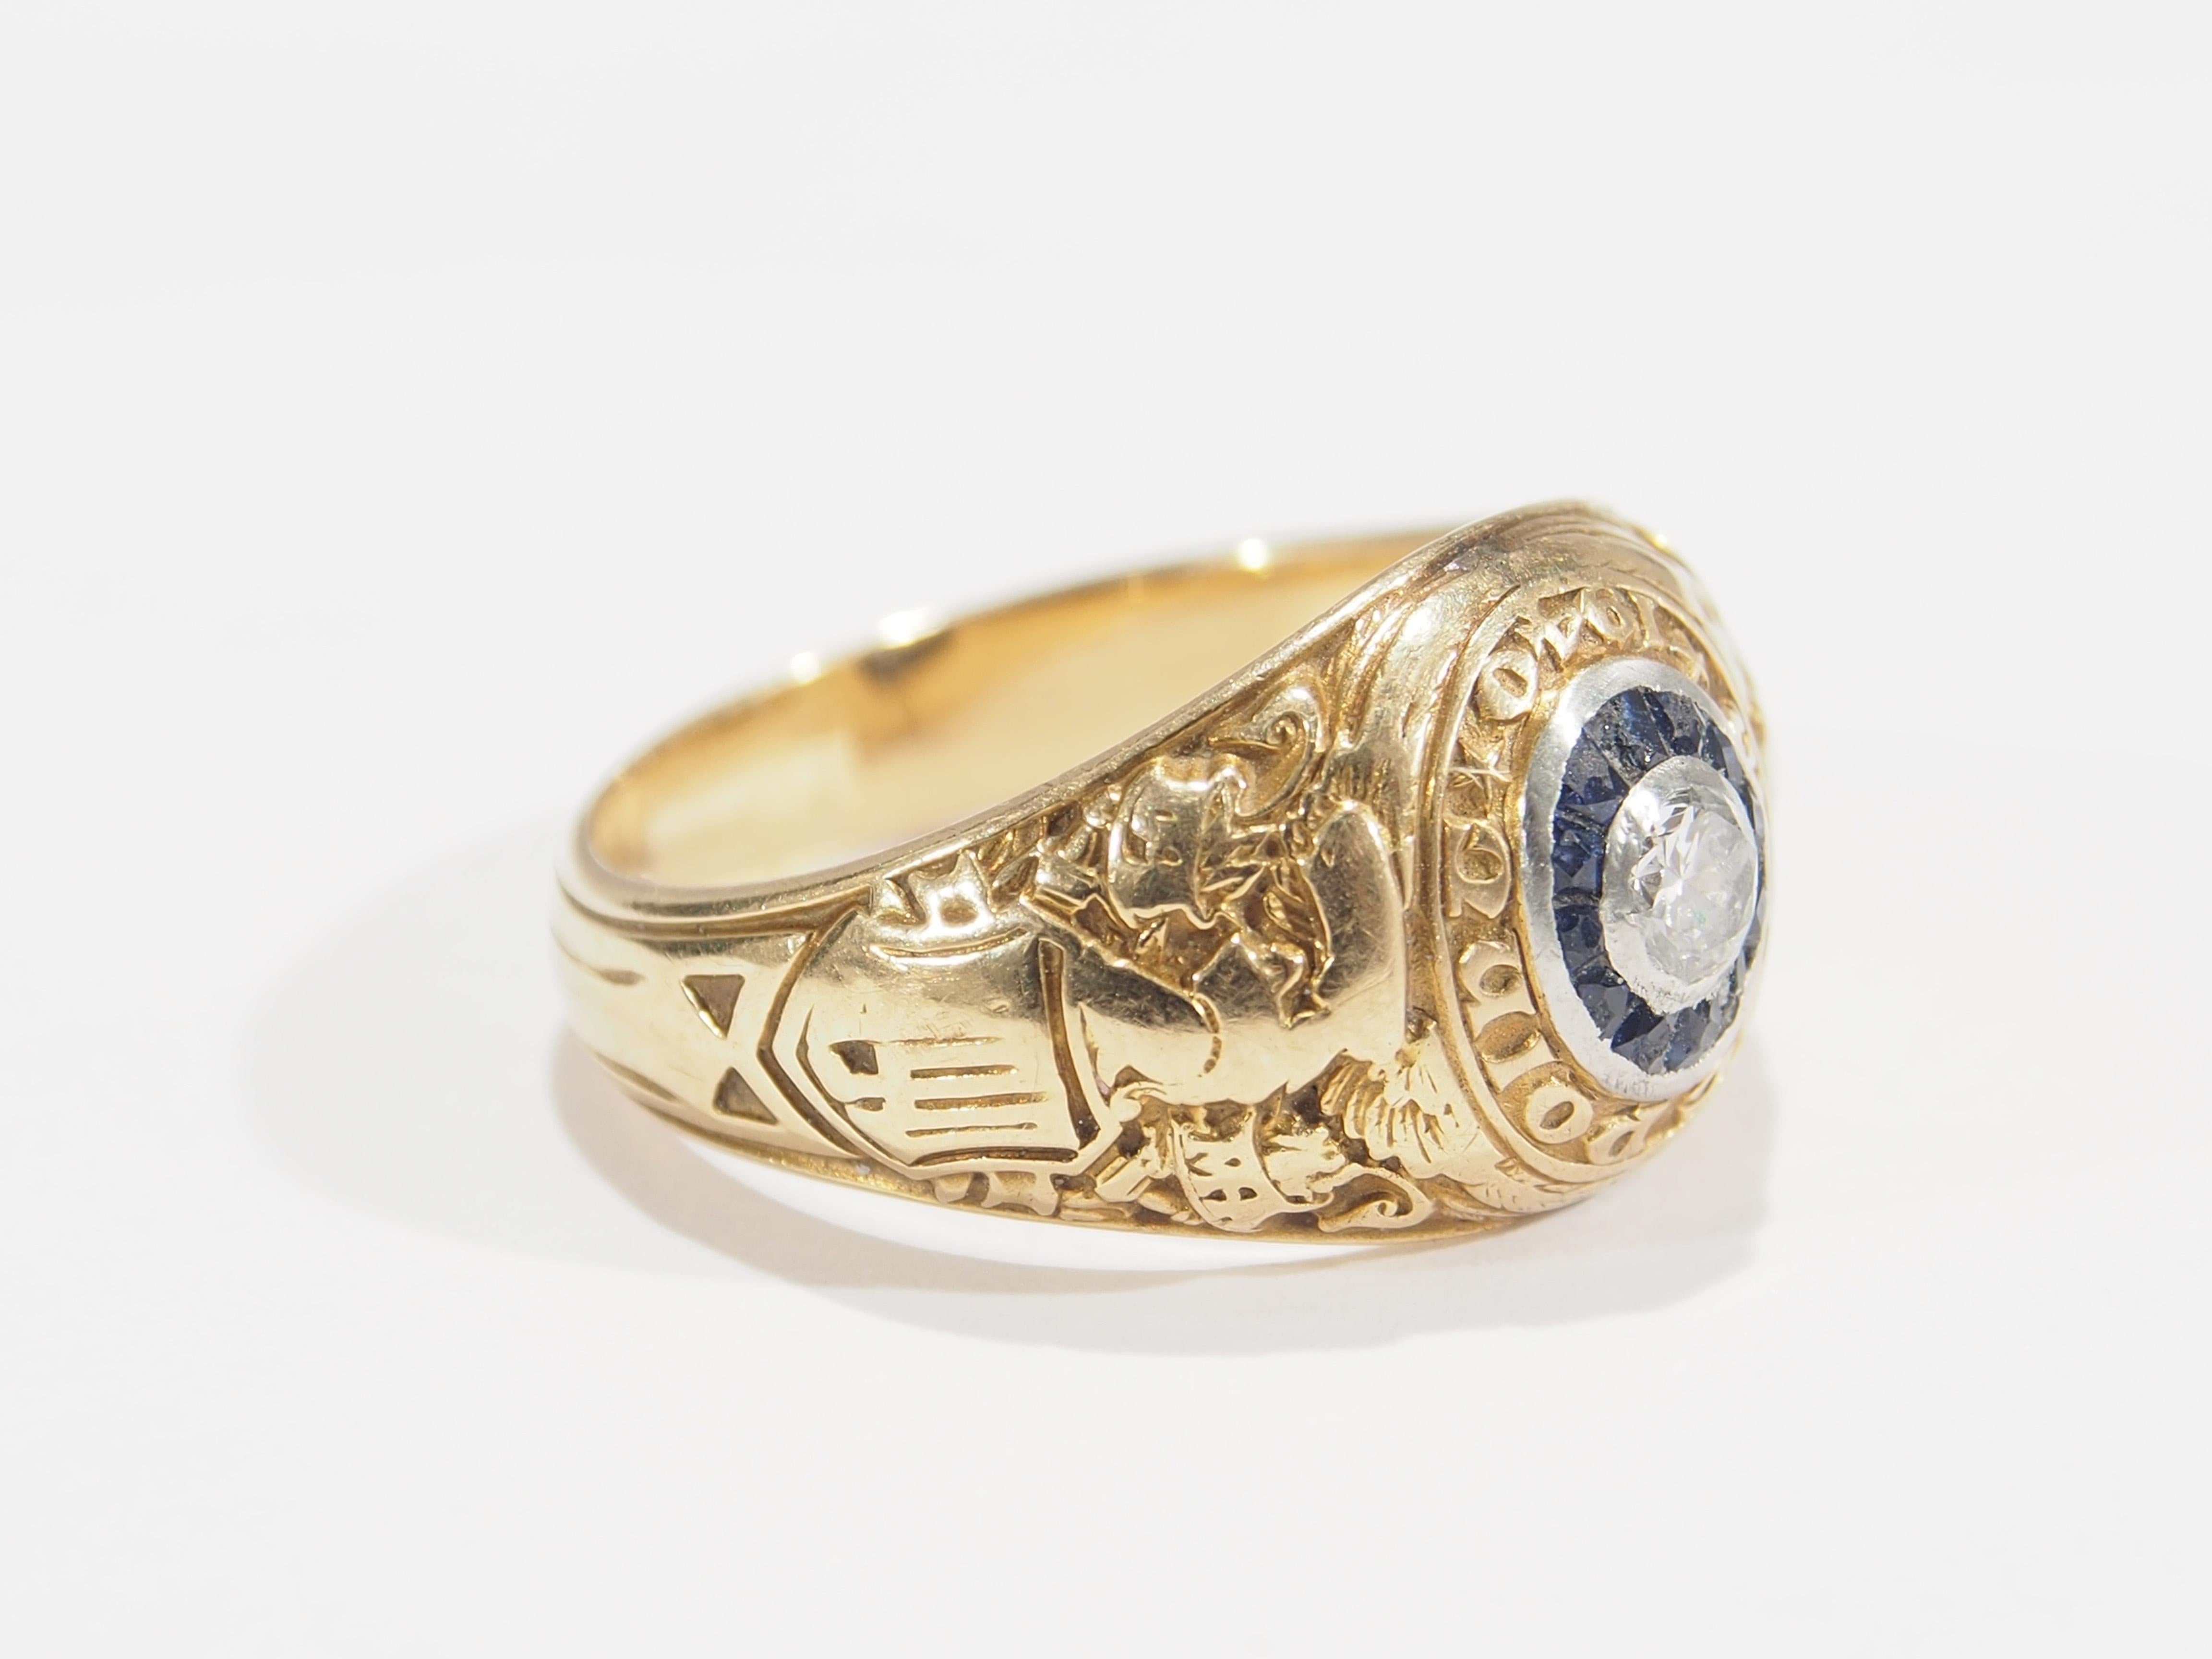 Tiffany & Co West Point Military Class Ring 1940. Featuring (1) Round Brilliant Cut Bezel set G-H color VS clarity Diamond approximately 0.23ct surrounded by (12) Sapphires. A piece of history. Gold weighs approximately 9.80 grams, finger size 8.